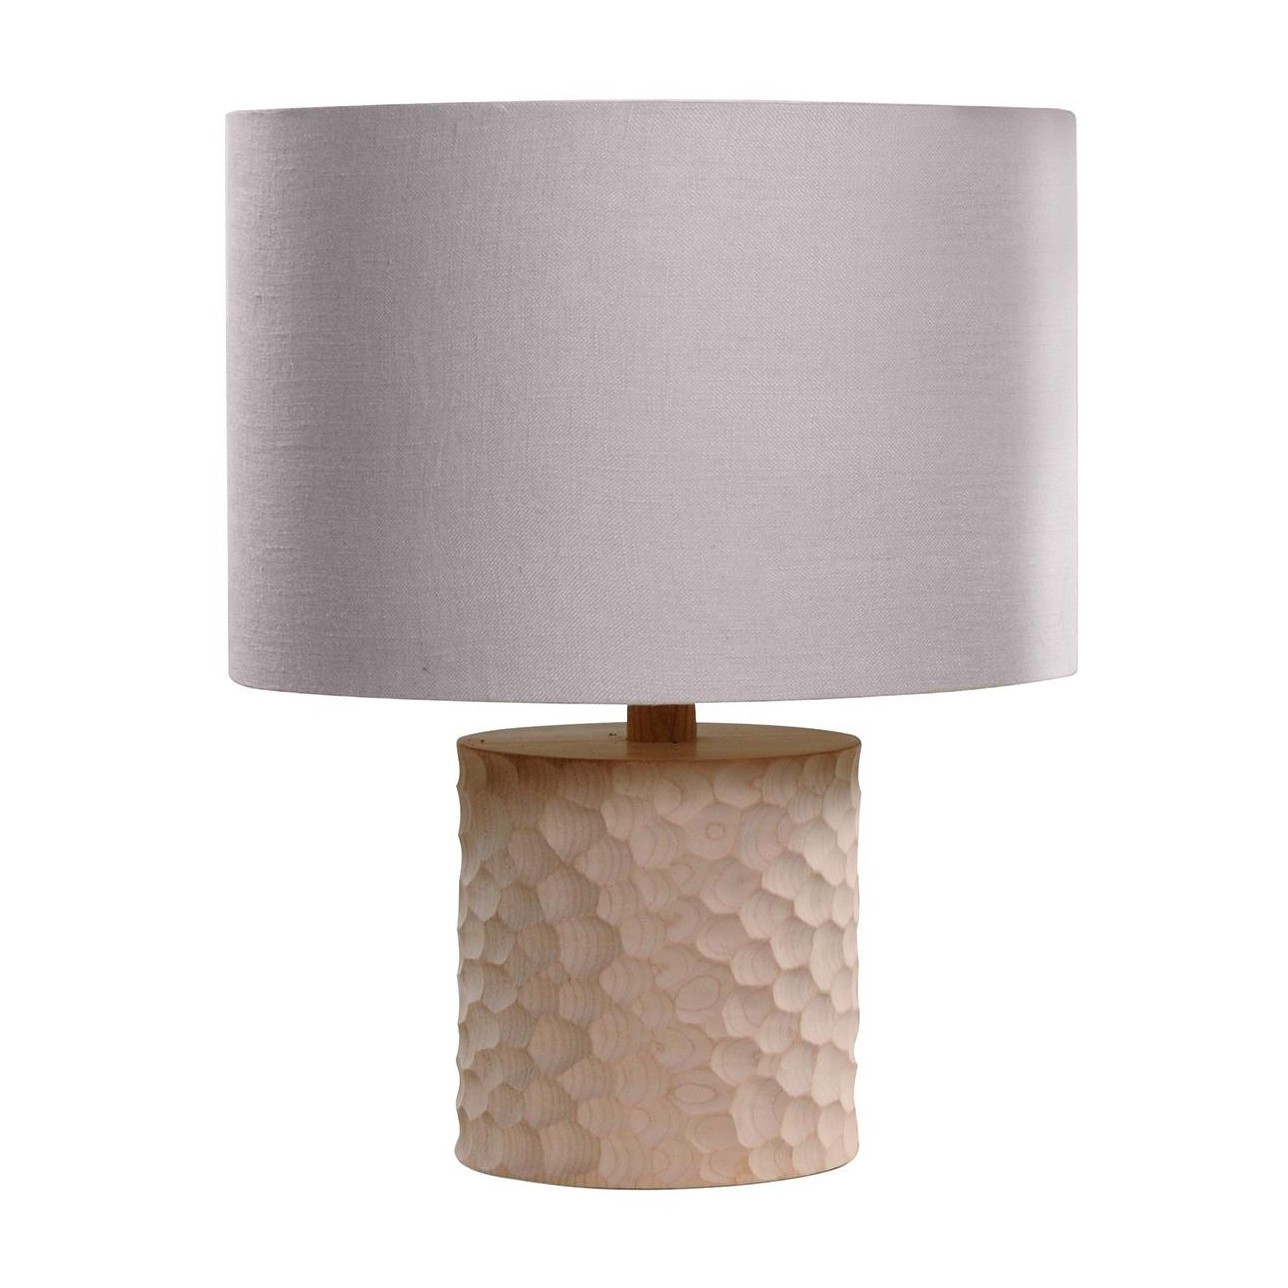 Fireplace Lamp Best Of touch Table Lamp